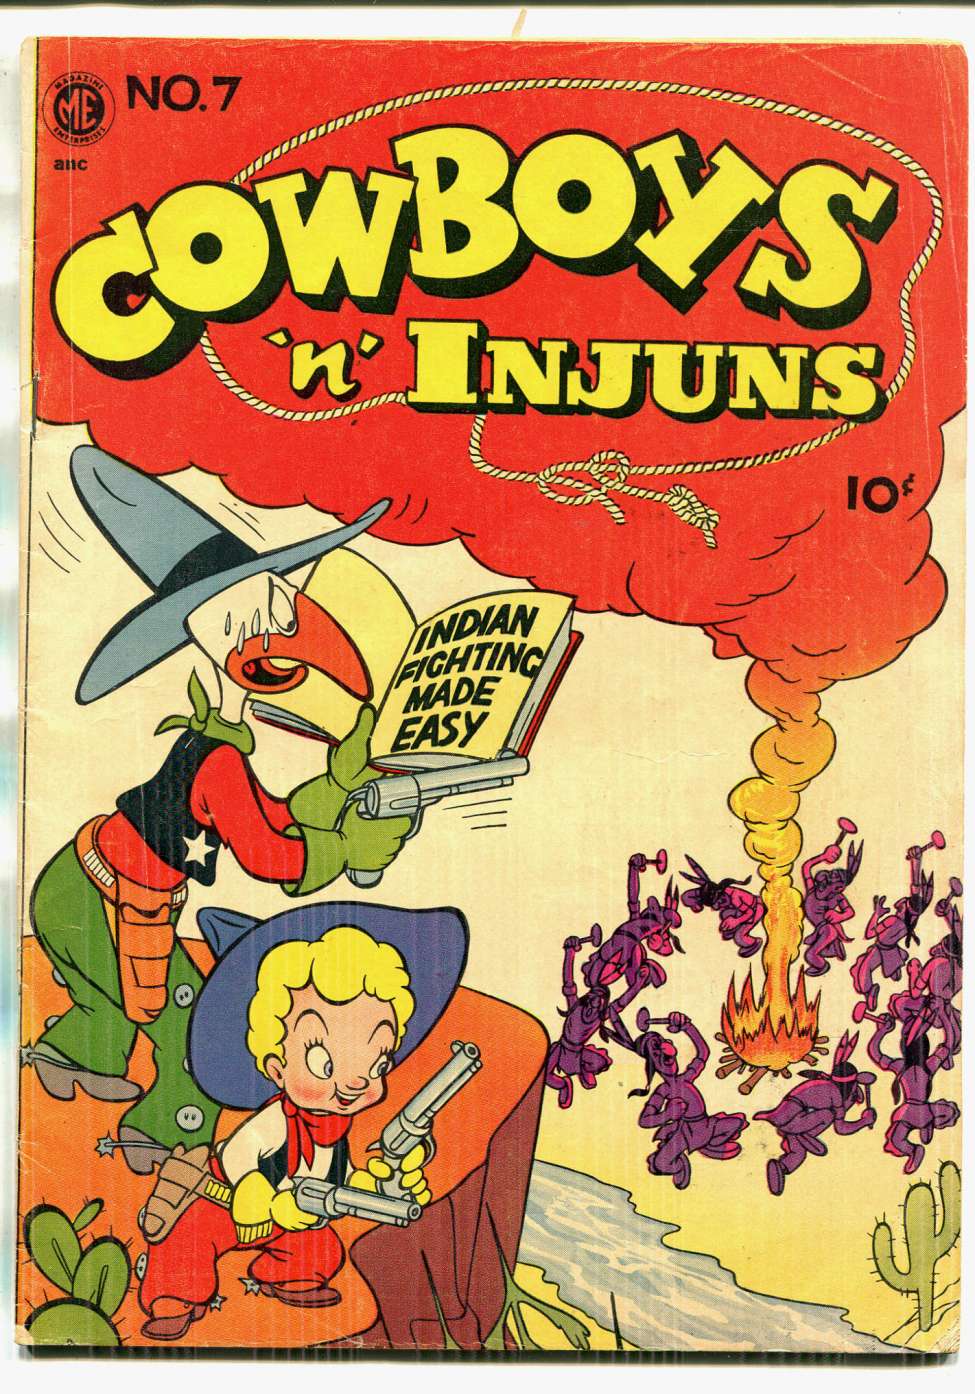 Book Cover For Cowboys 'N' Injuns 7